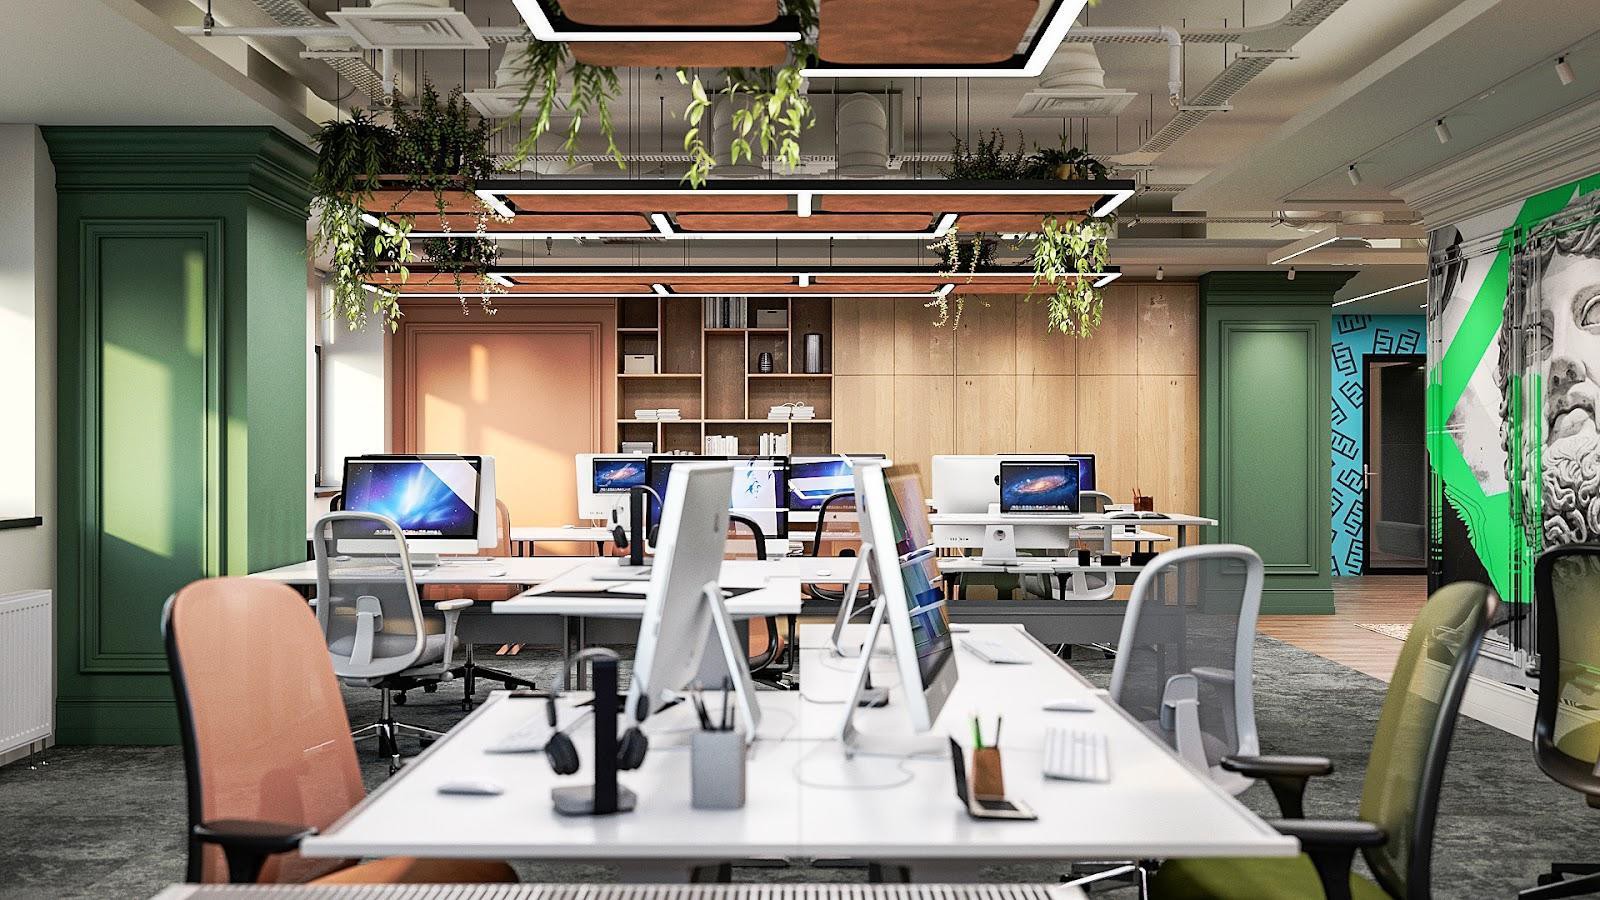 The role of landscaping, lighting and acoustics in a modern office 13